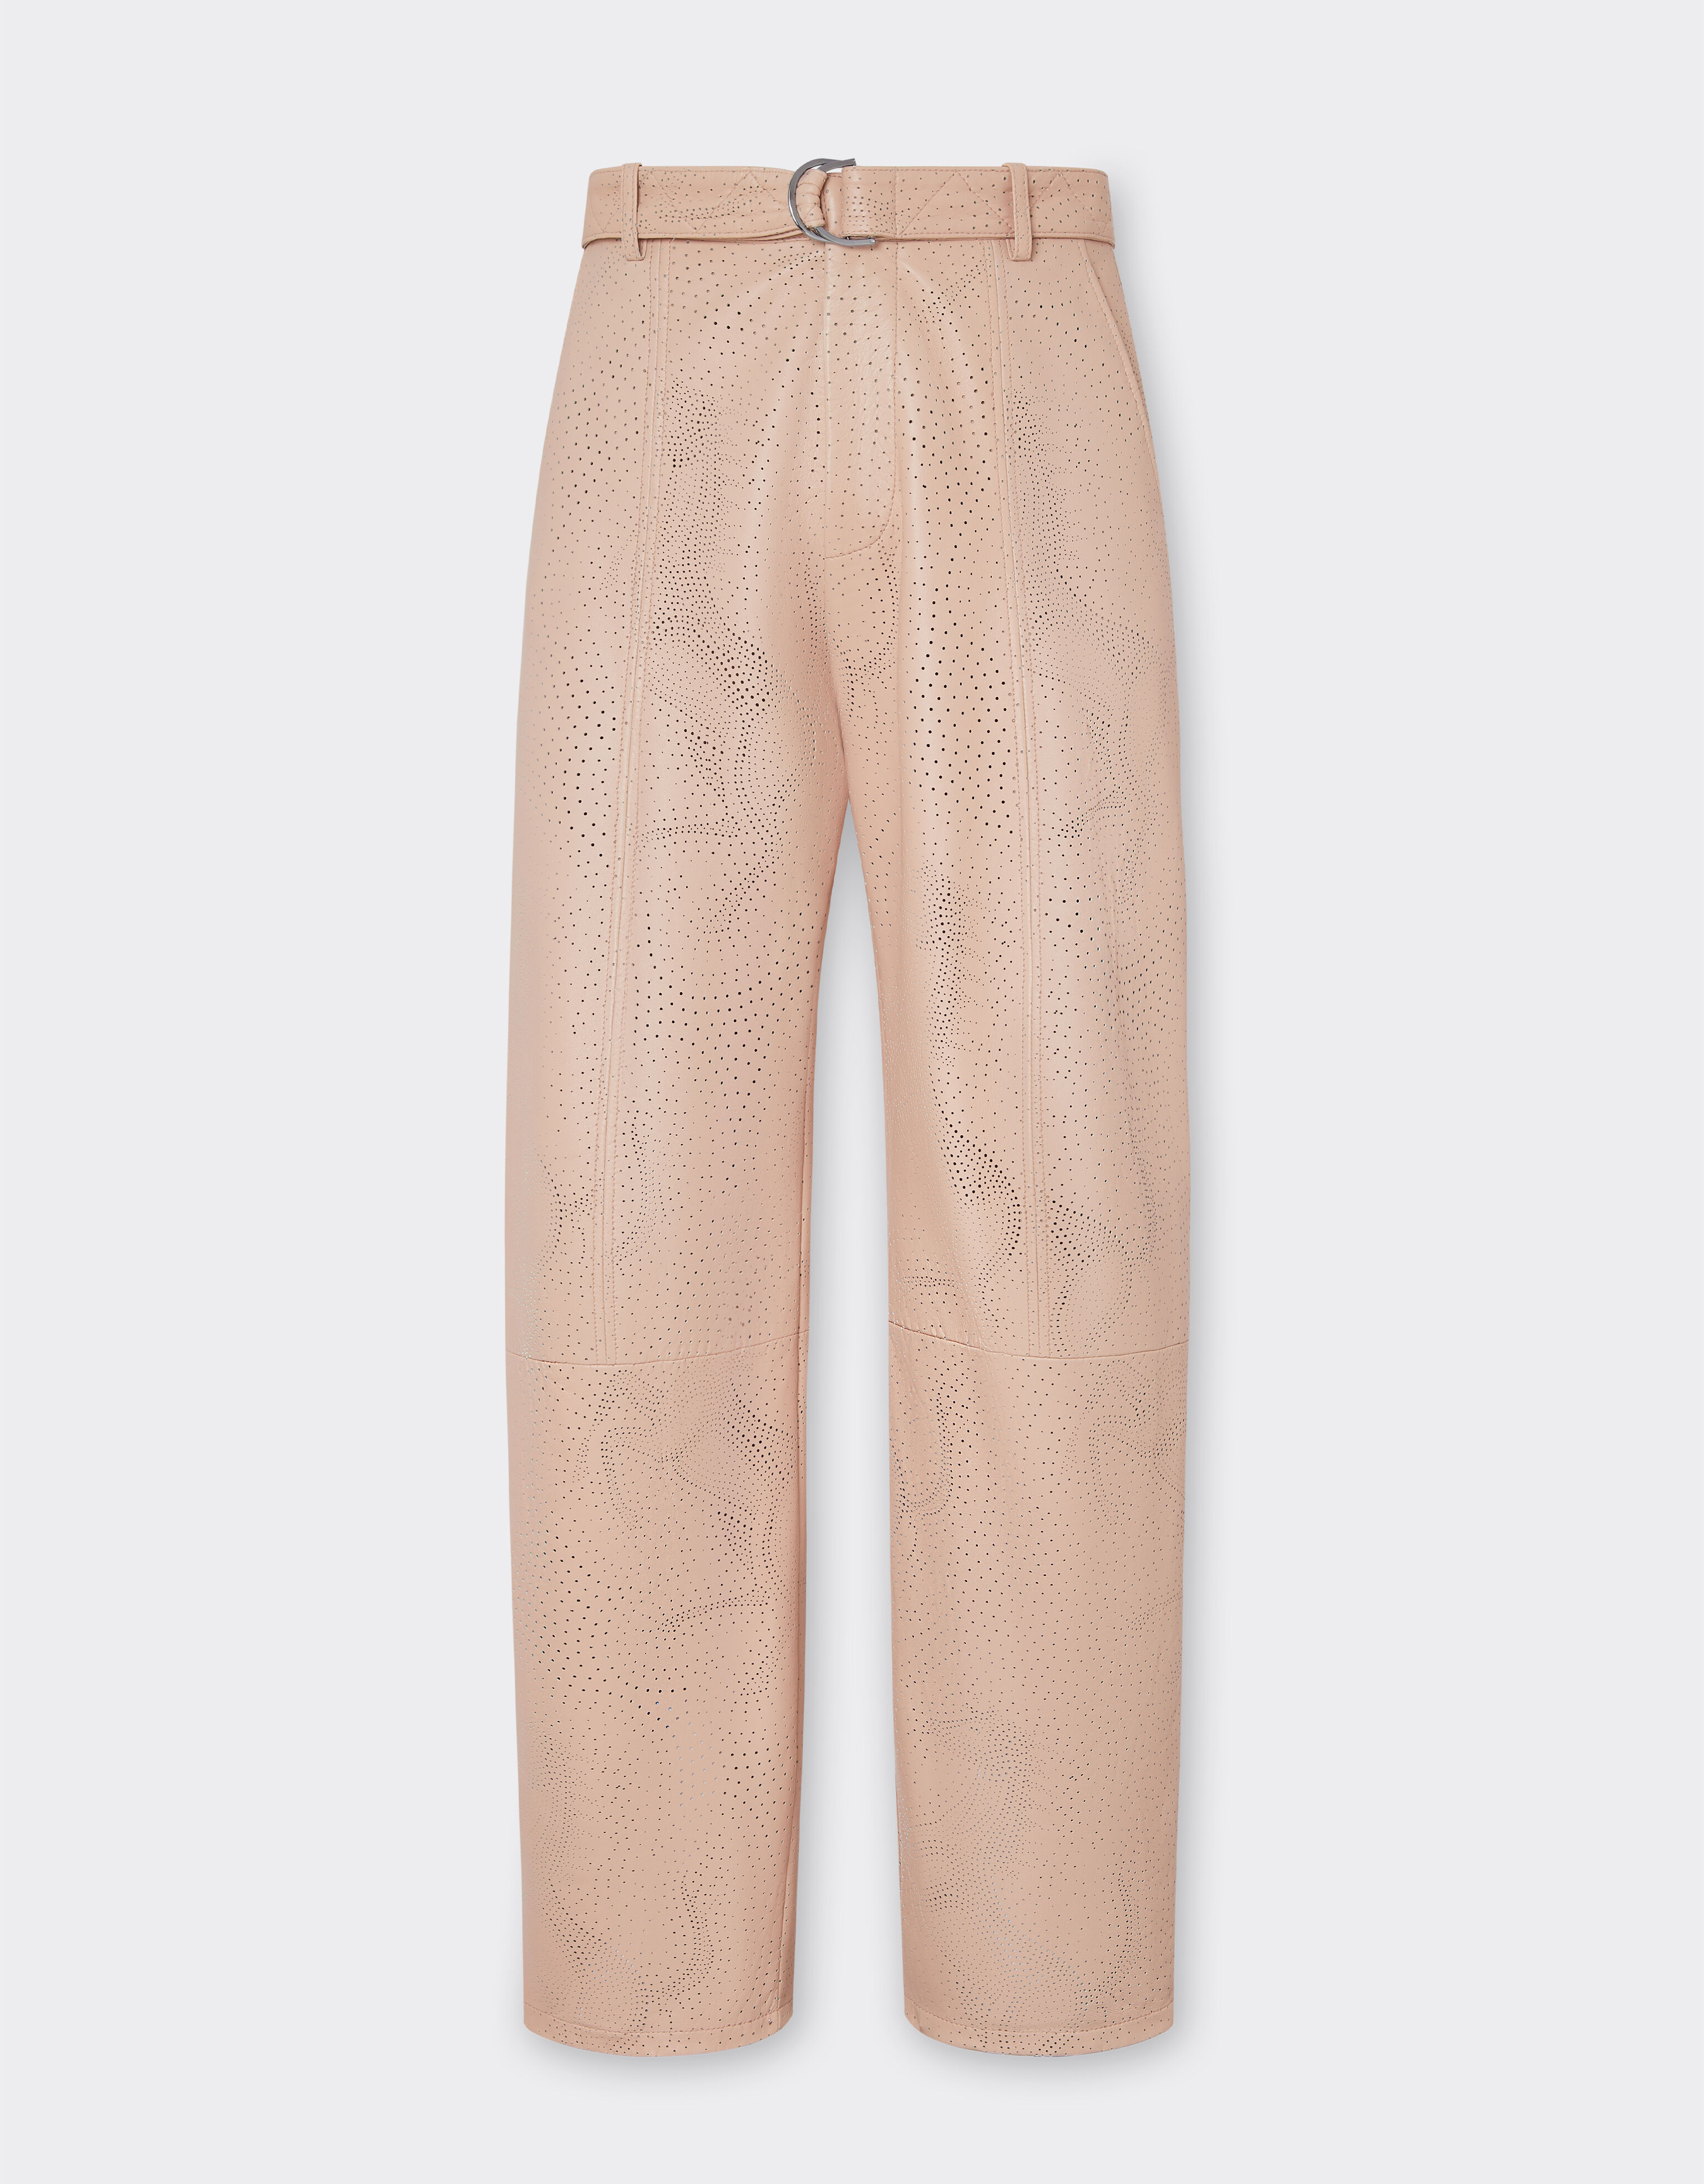 Ferrari Perforated leather trousers with Prancing Horse detail Ingrid 20684f